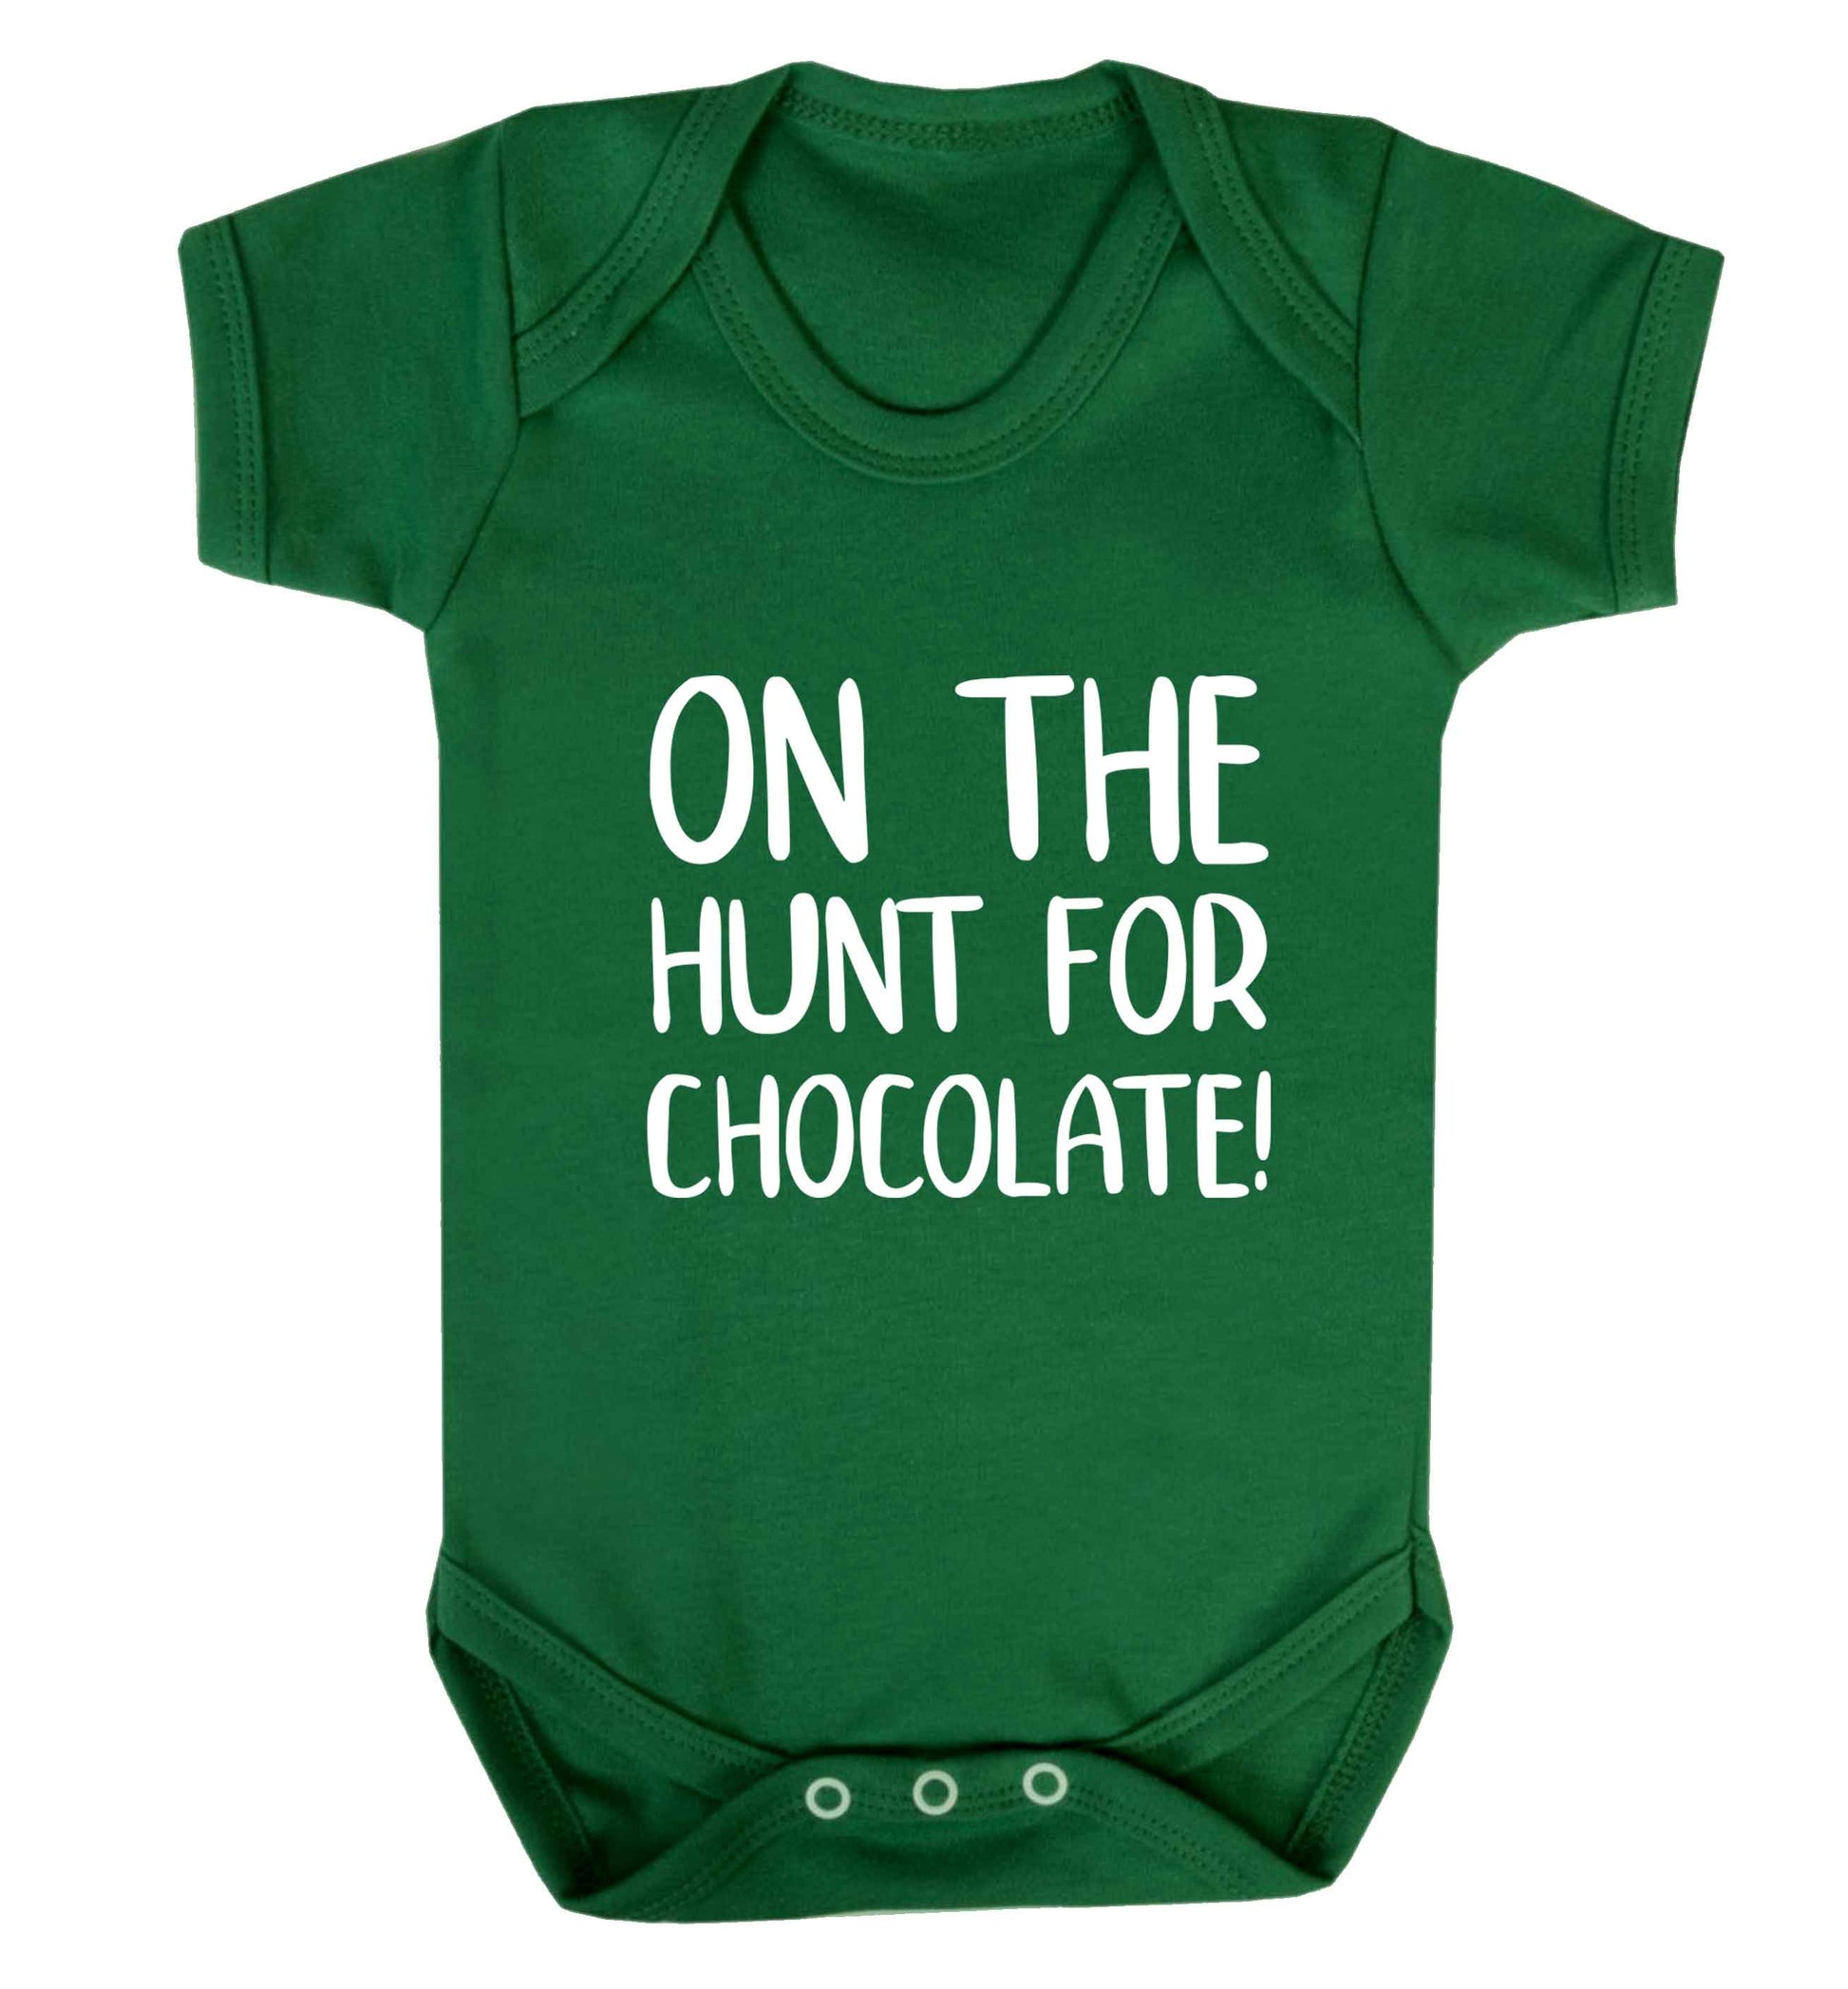 On the hunt for chocolate! baby vest green 18-24 months